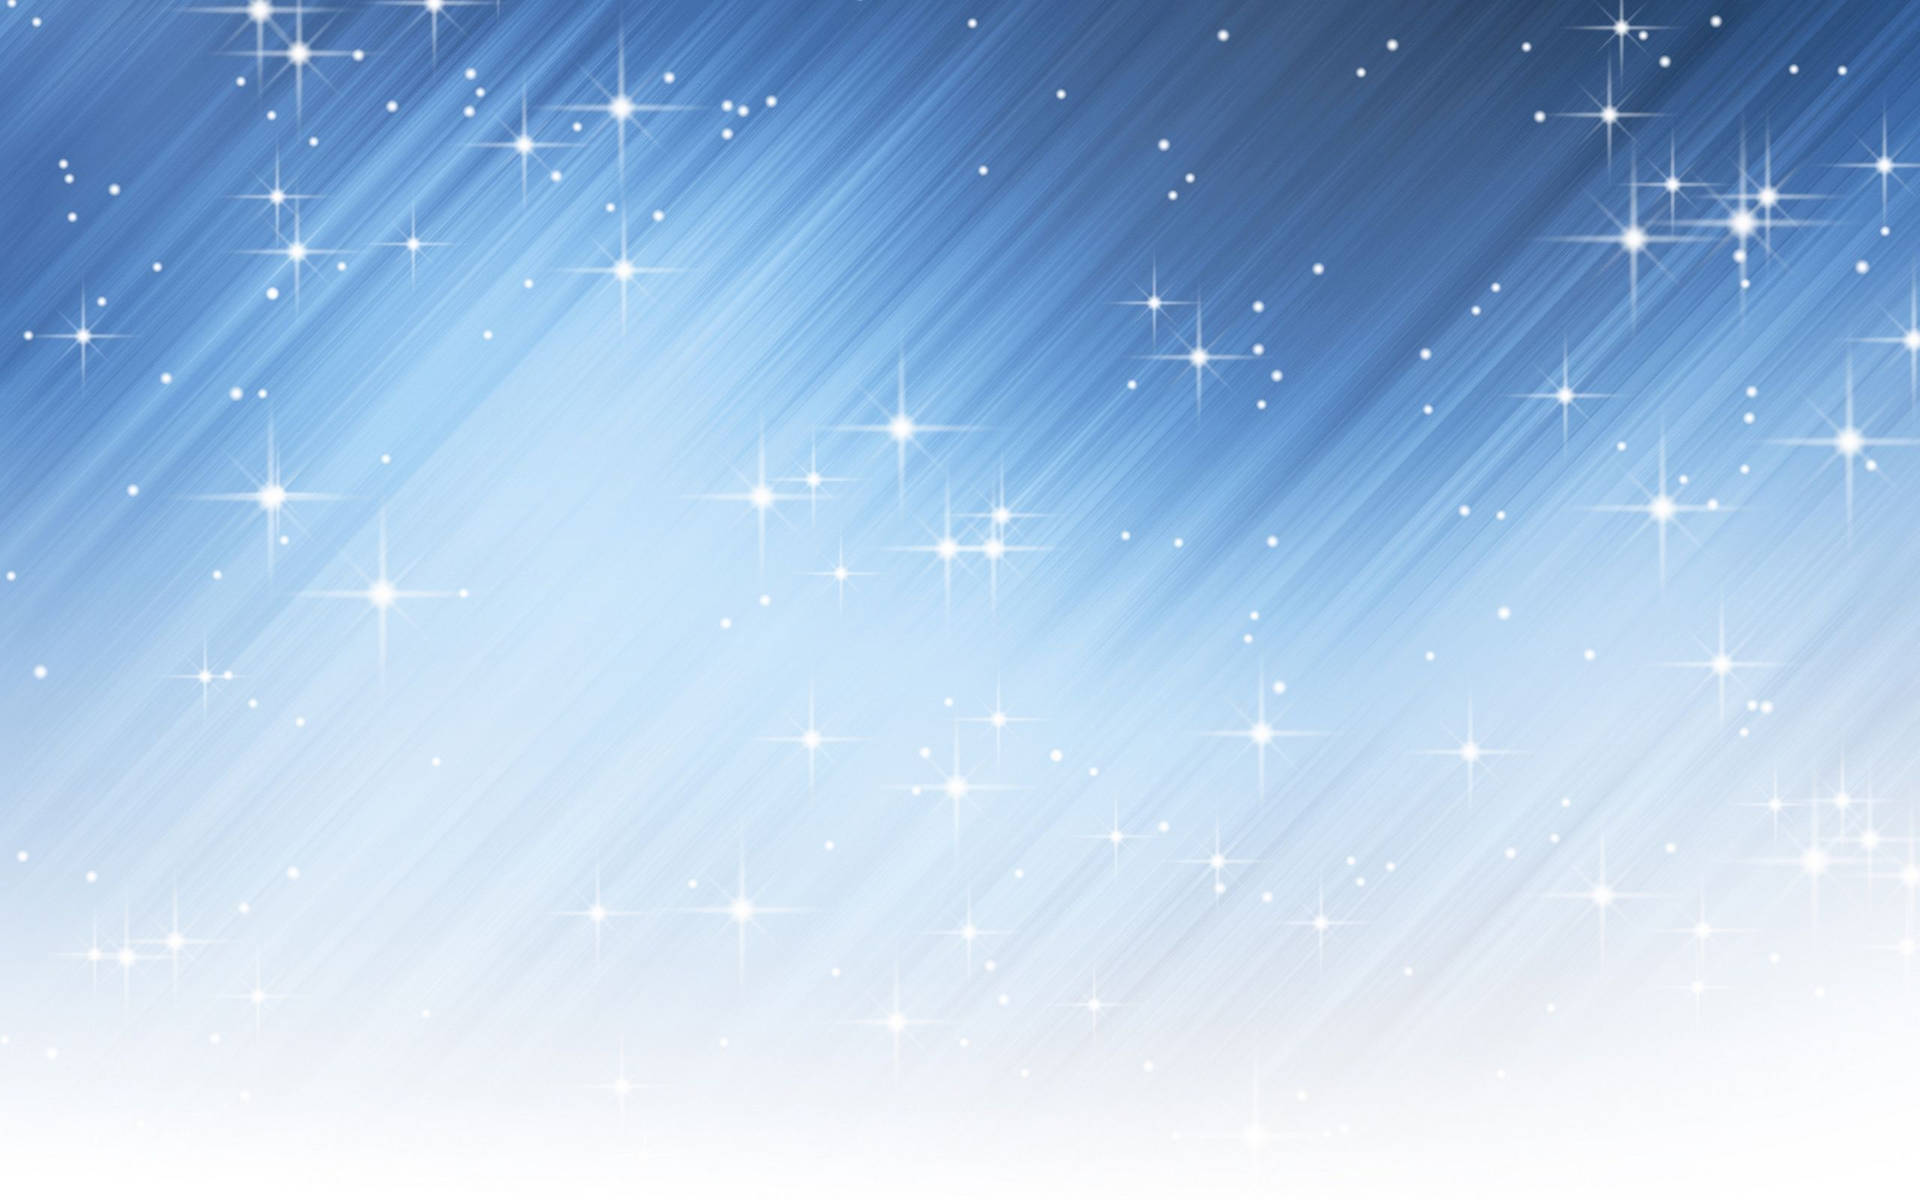 Shiny background with white sparkling stars on diagonal blue textured lines.